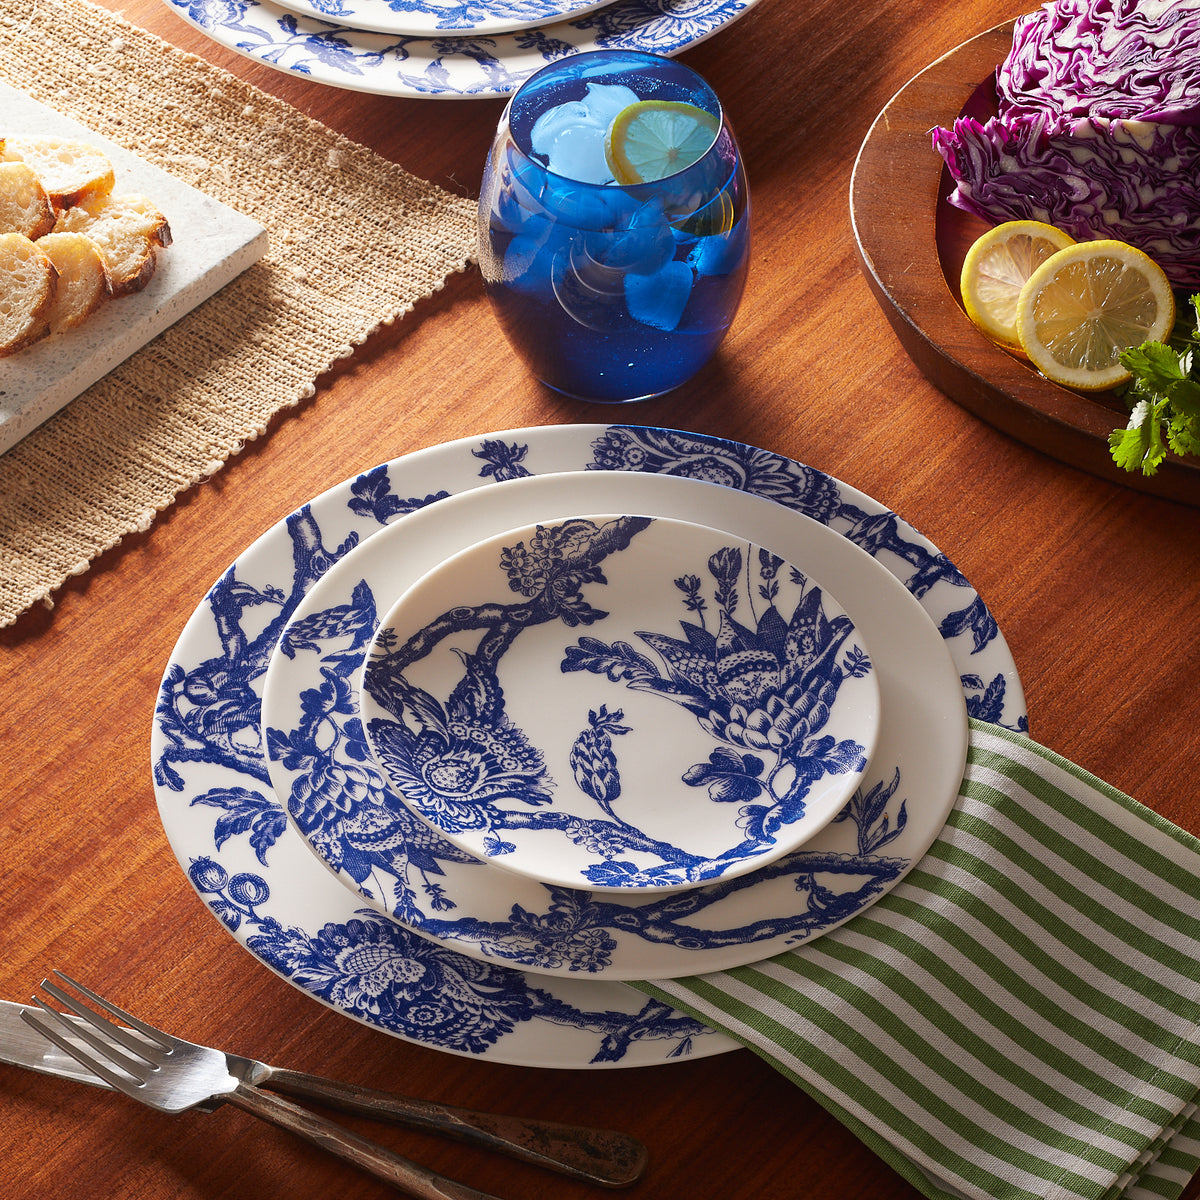 A blue and white patterned premium porcelain dinnerware set, specifically the **Arcadia Small Plates** by **Caskata Artisanal Home**, with a striped green napkin sits on a wooden table. Accompanied by a blue glass, a bowl of sliced cabbage and lemons, and slices of bread on a cutting board, this heirloom-quality dinnerware is both dishwasher and microwave safe.